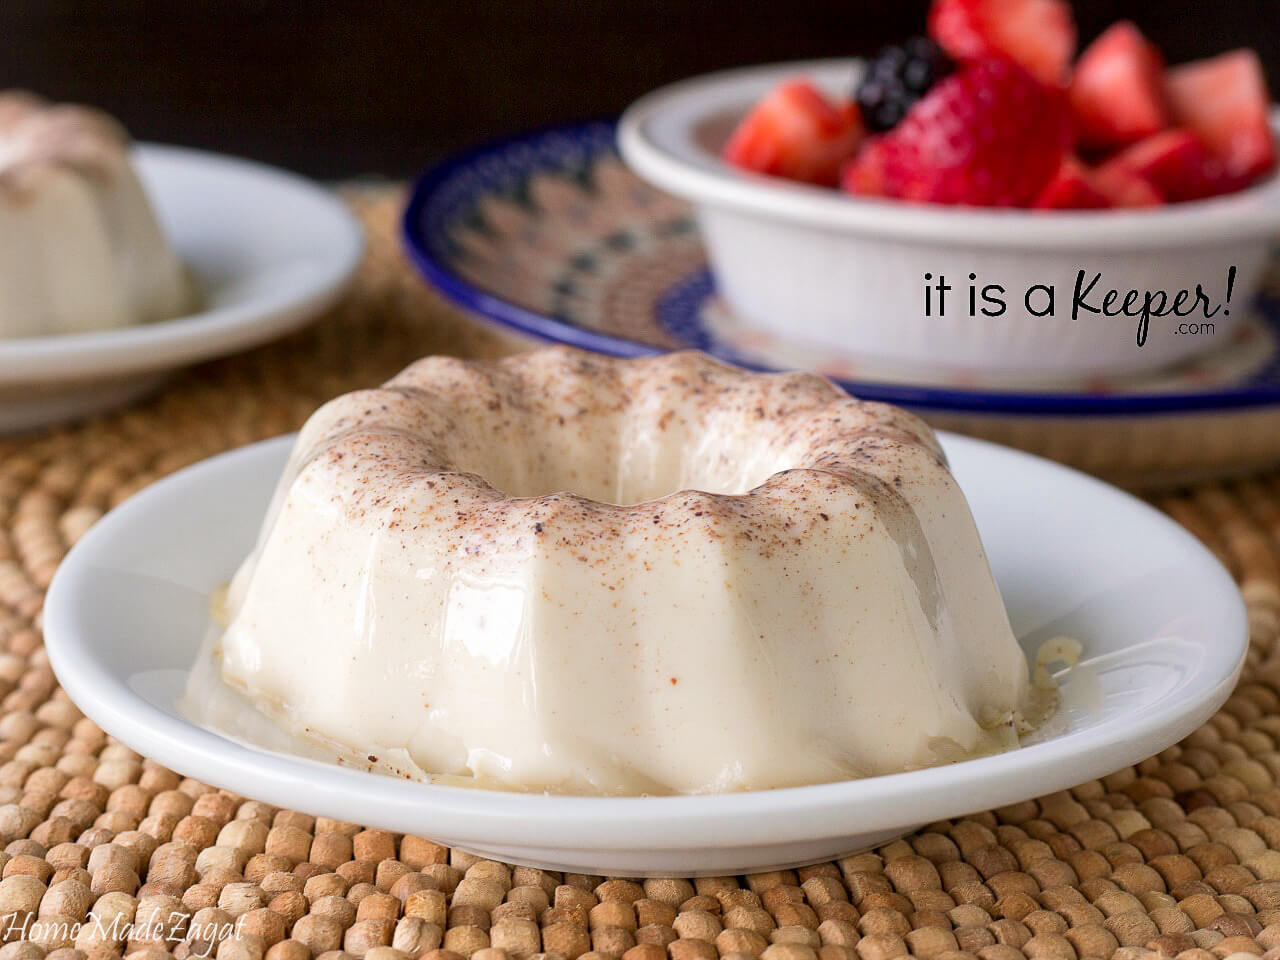 Coconut BlancMange recipe - a Caribbean inspired pudding served with fresh fruit is a decadent spring dessert